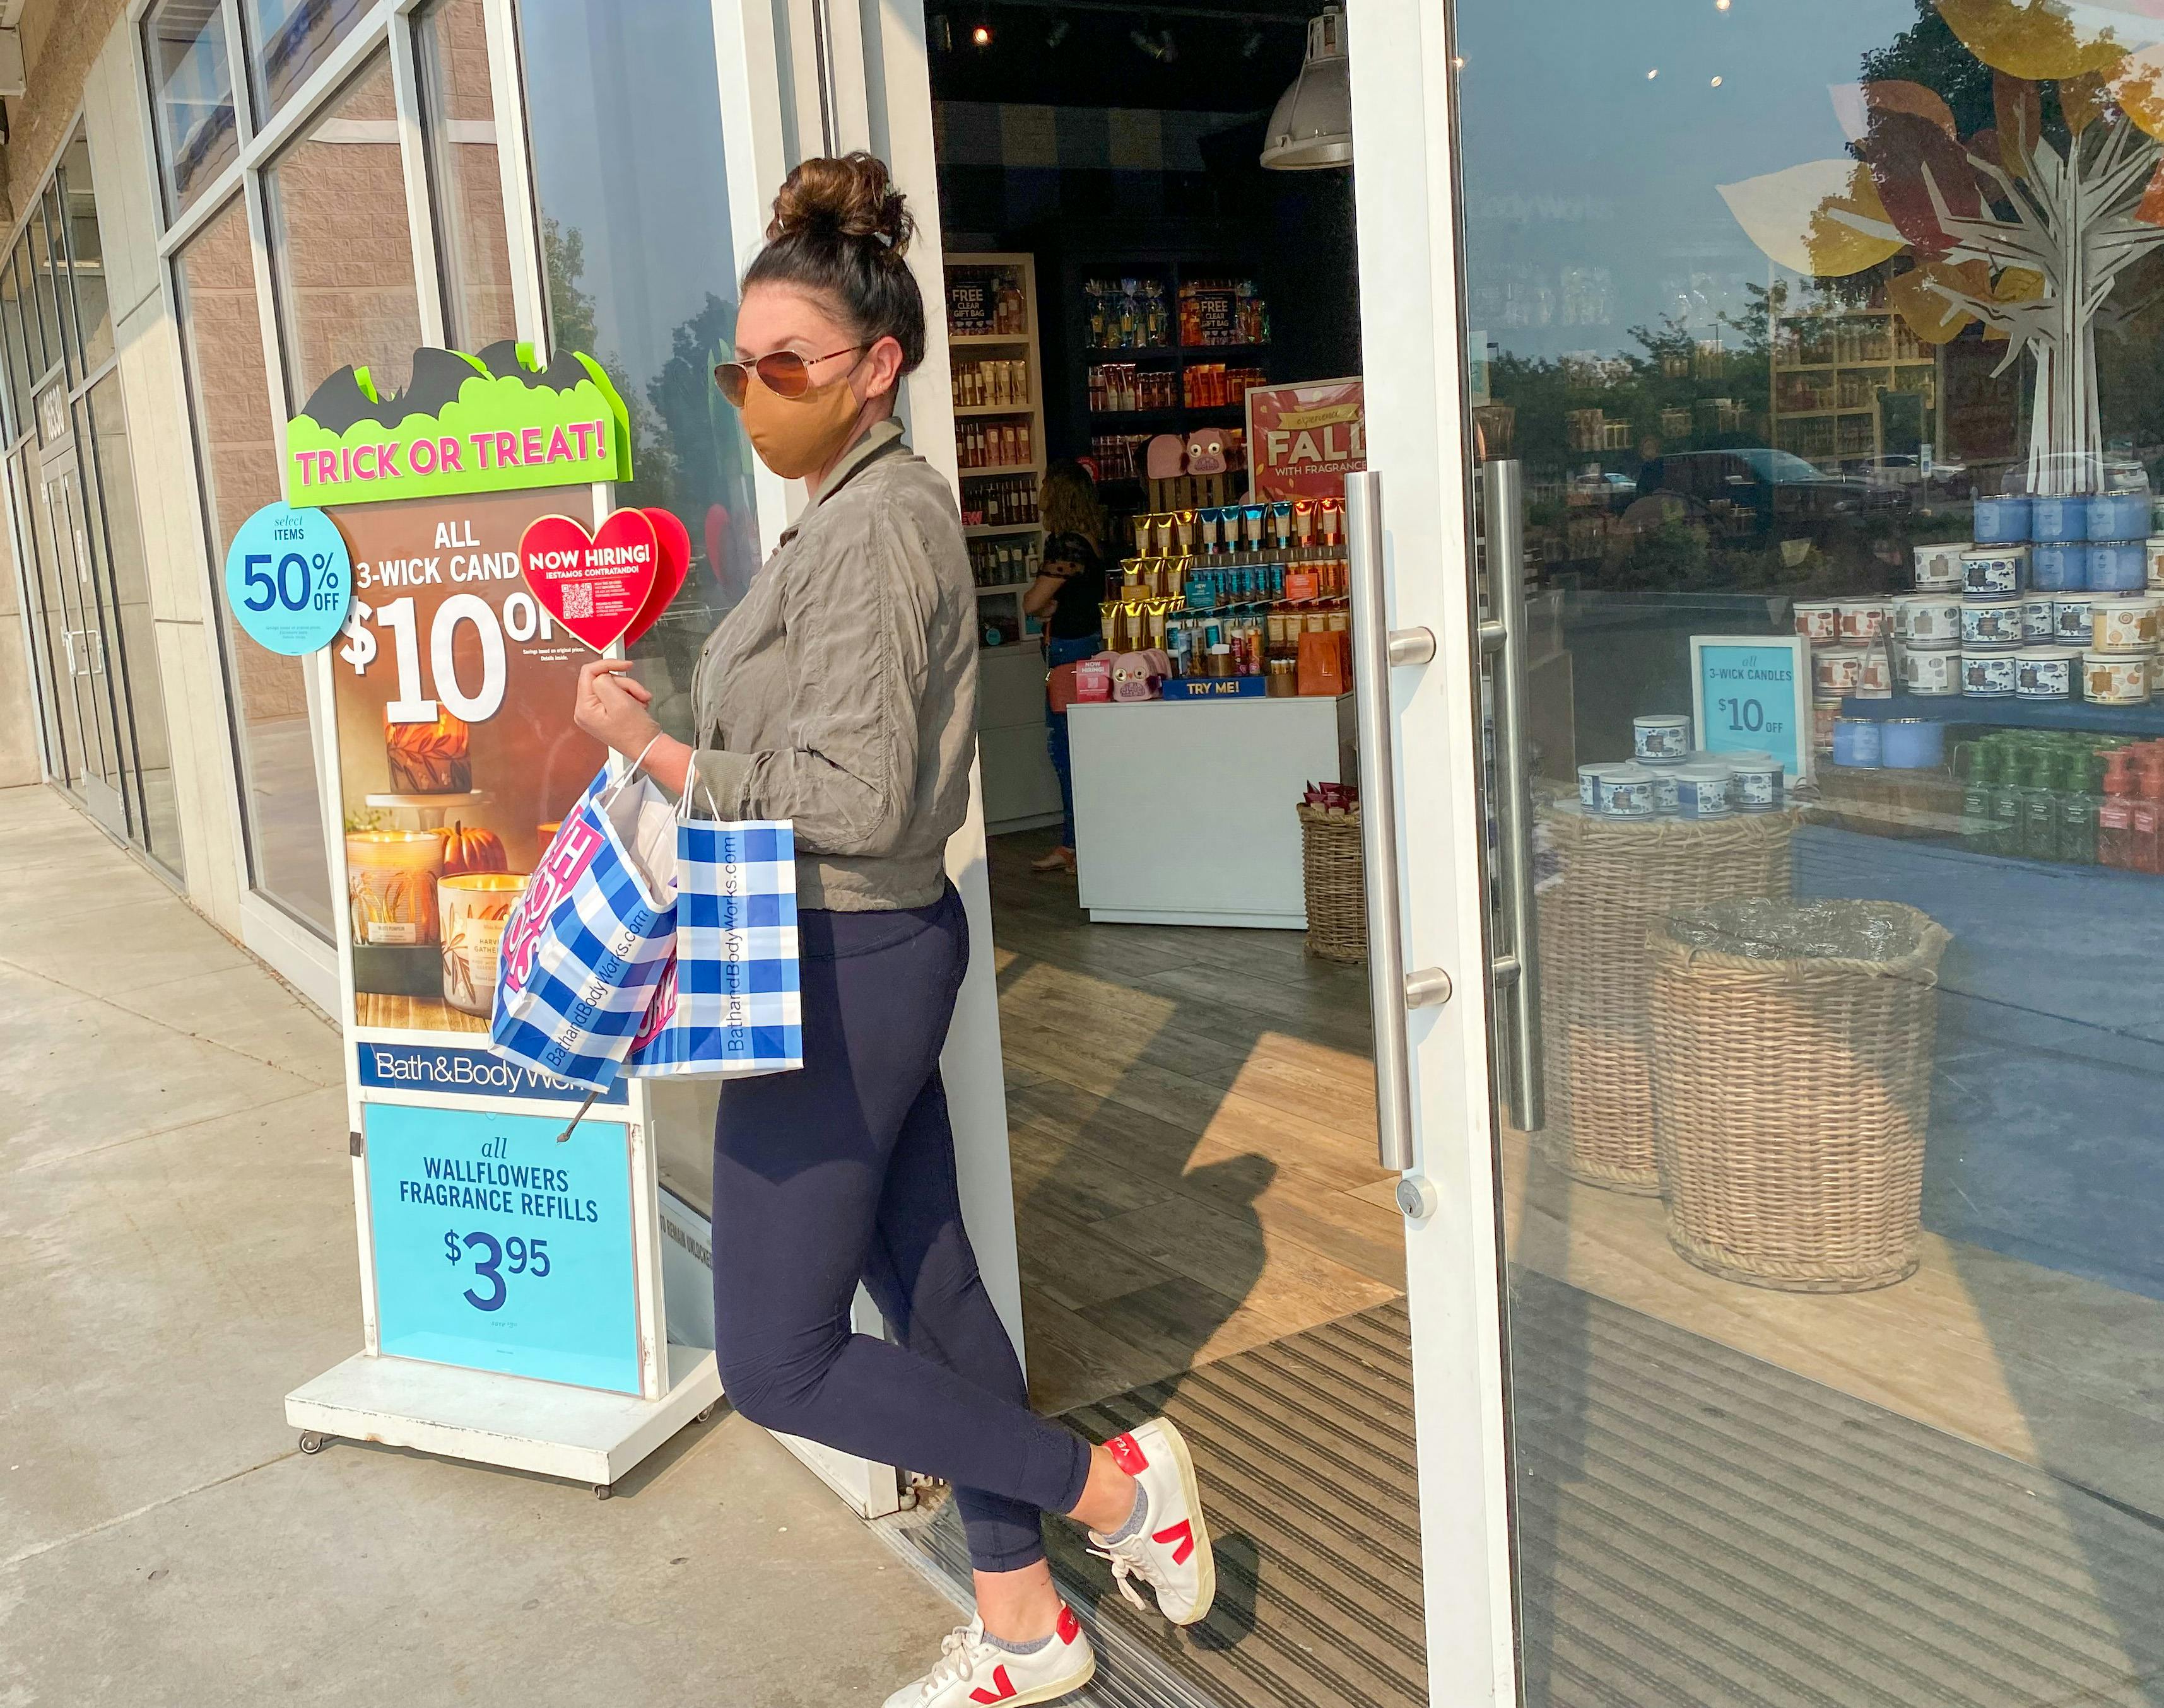 A woman walking out of a bath and body works store carrying shopping bags.